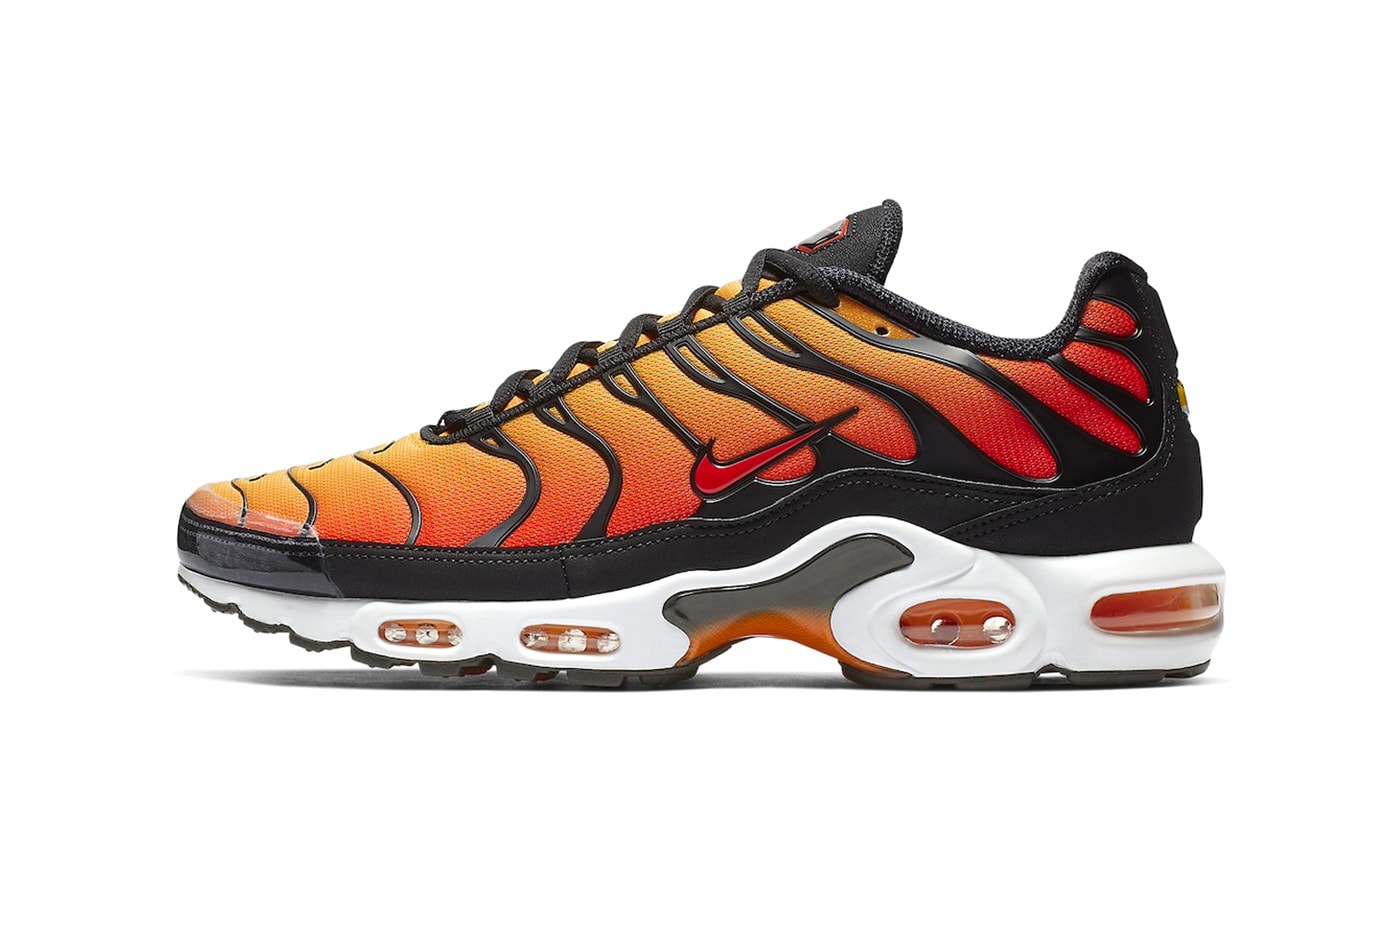 Nike Air Max Plus "Sunset" Is Returning Later This Year Fall 2024 HF0552-001 Black/Pimento-Bright Ceramic-Resin-White